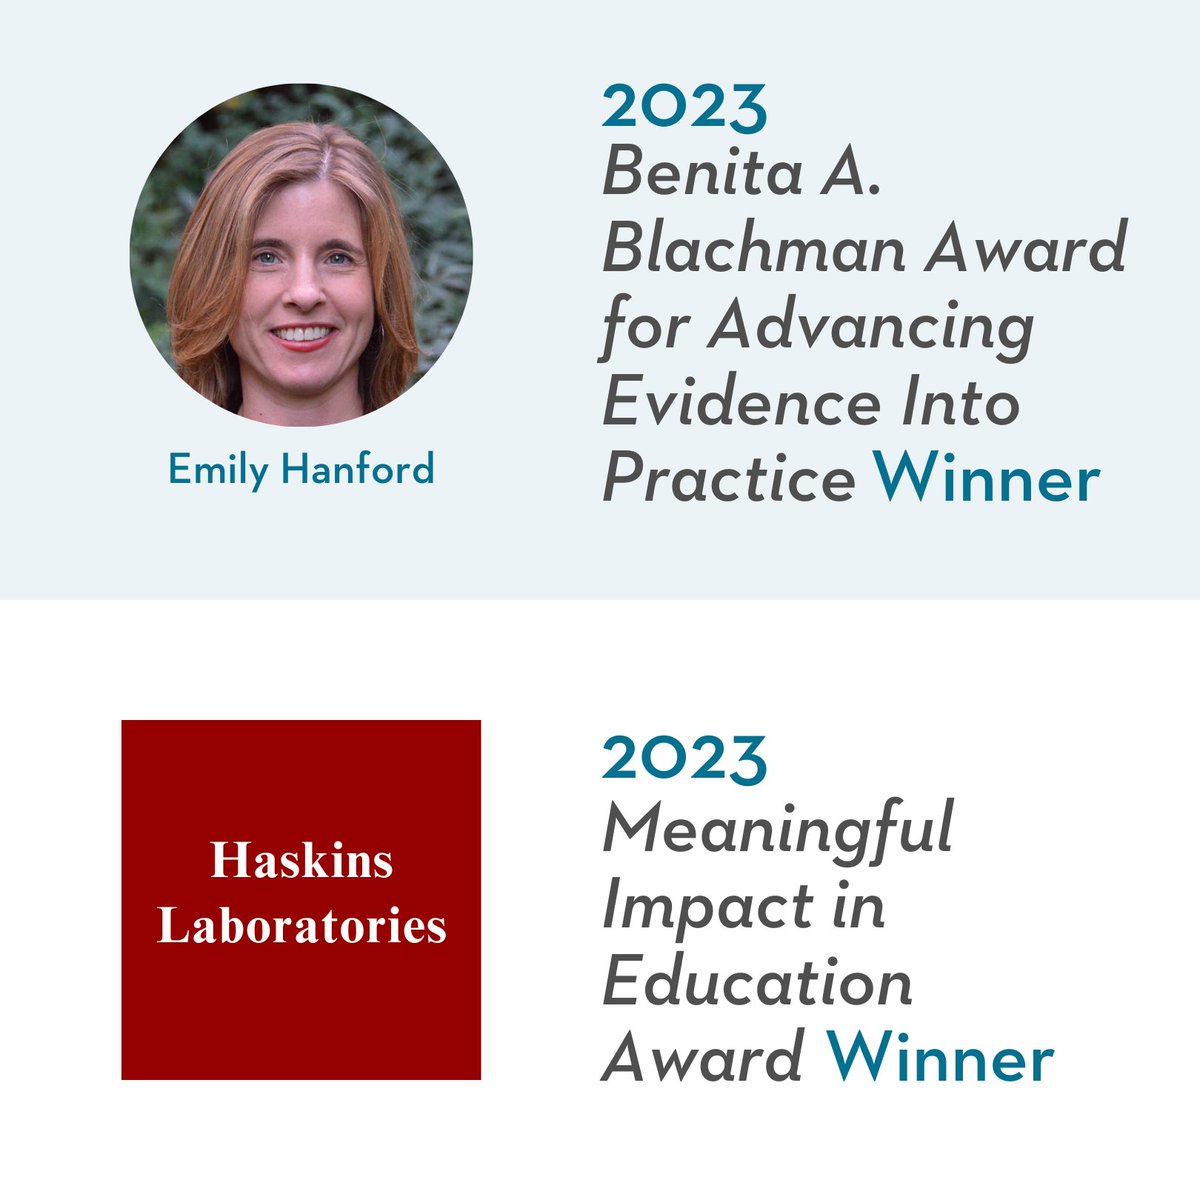 We are excited to announce the 2023 recipient of our Benita A. Blachman Award for Advancing Evidence Into Practice is @ehanford and the recipient of our Meaningful Impact in Education Award is @haskinslabs. #TRLConf2023